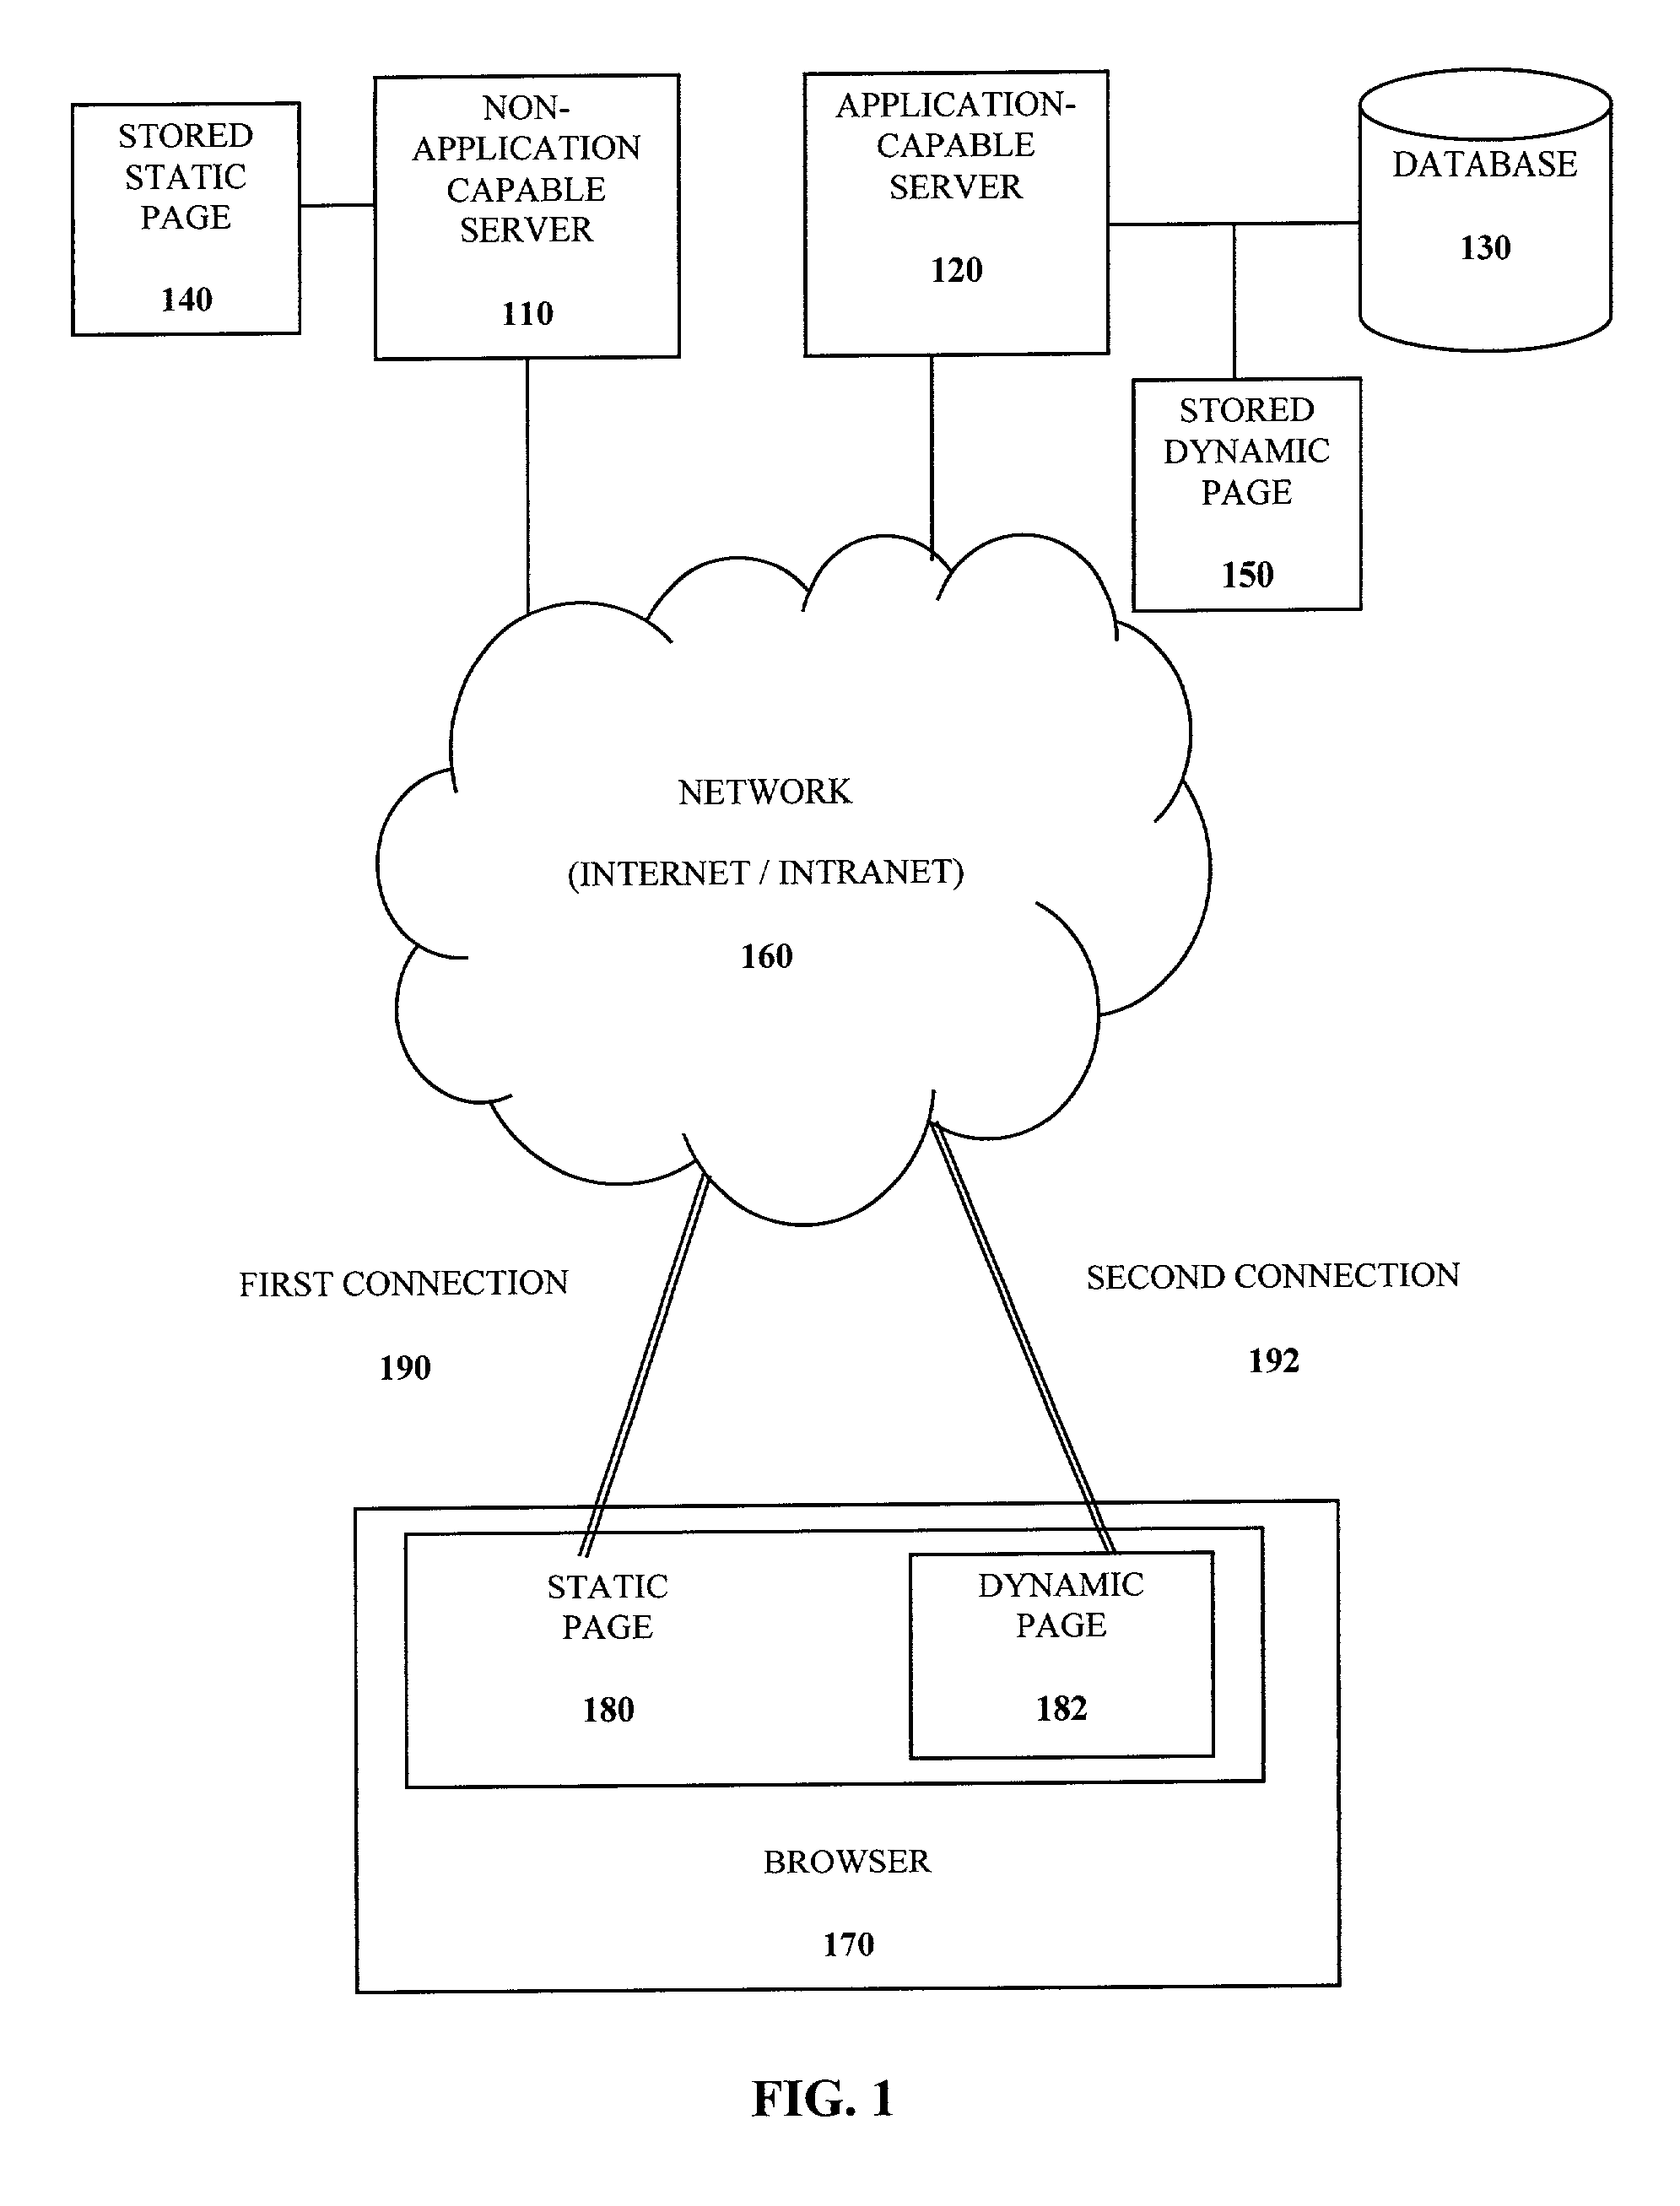 Dynamic content delivery to static page in non-application capable environment